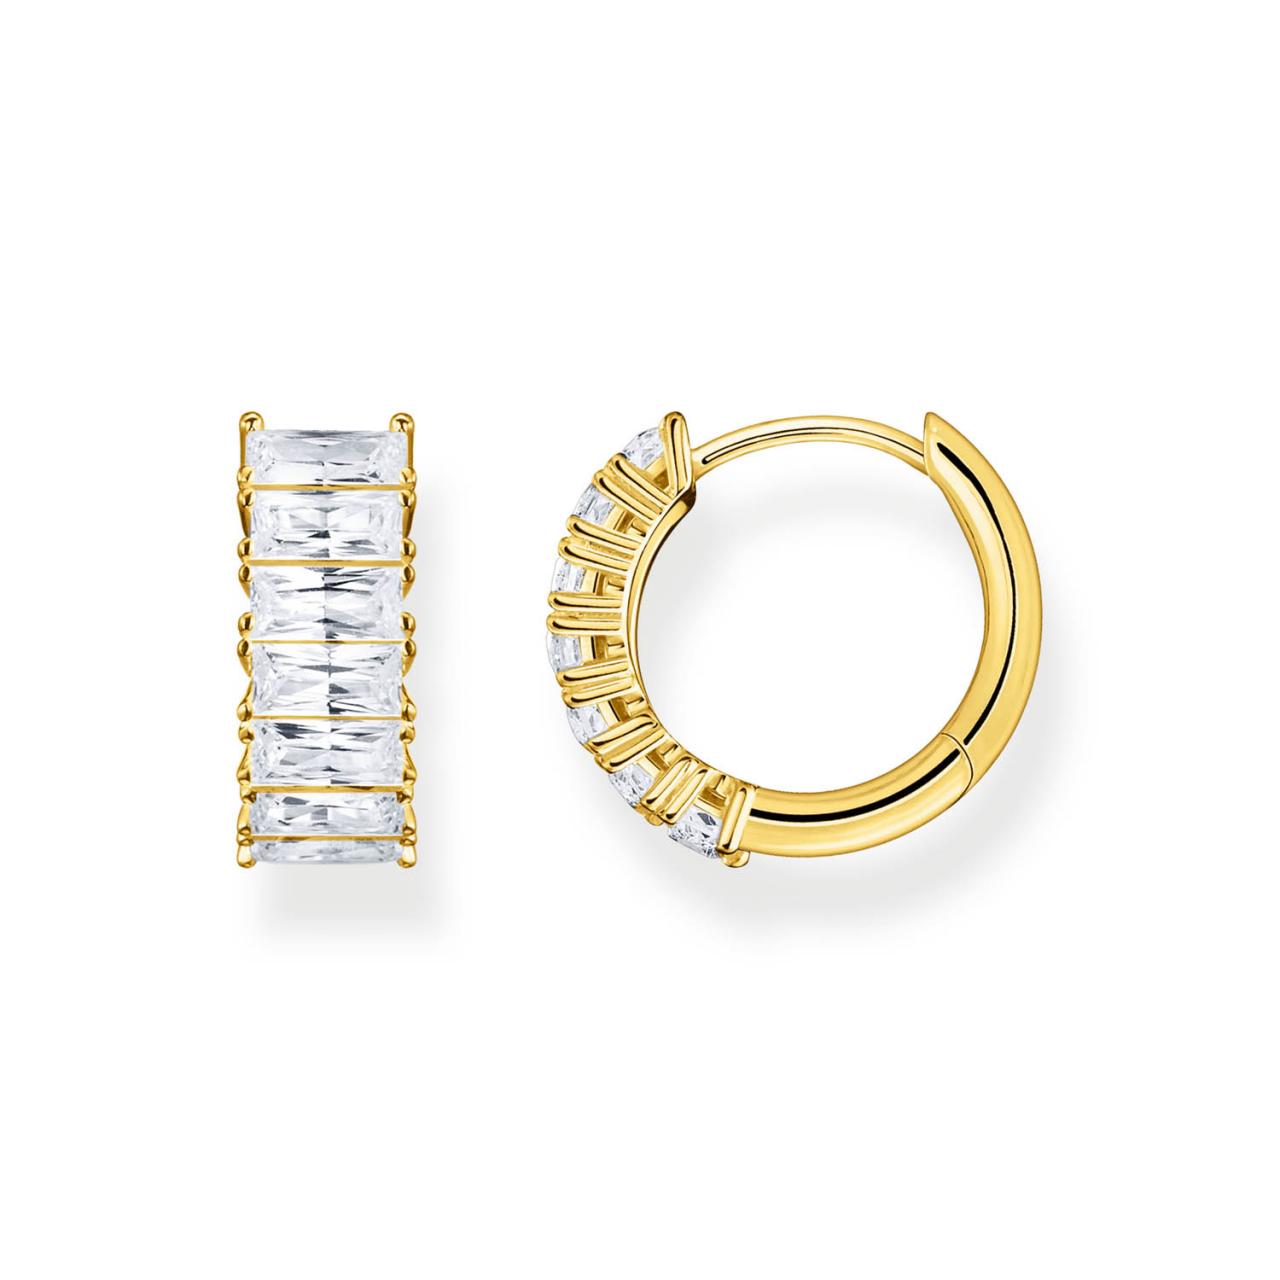 Gold Plated Cz Earrings